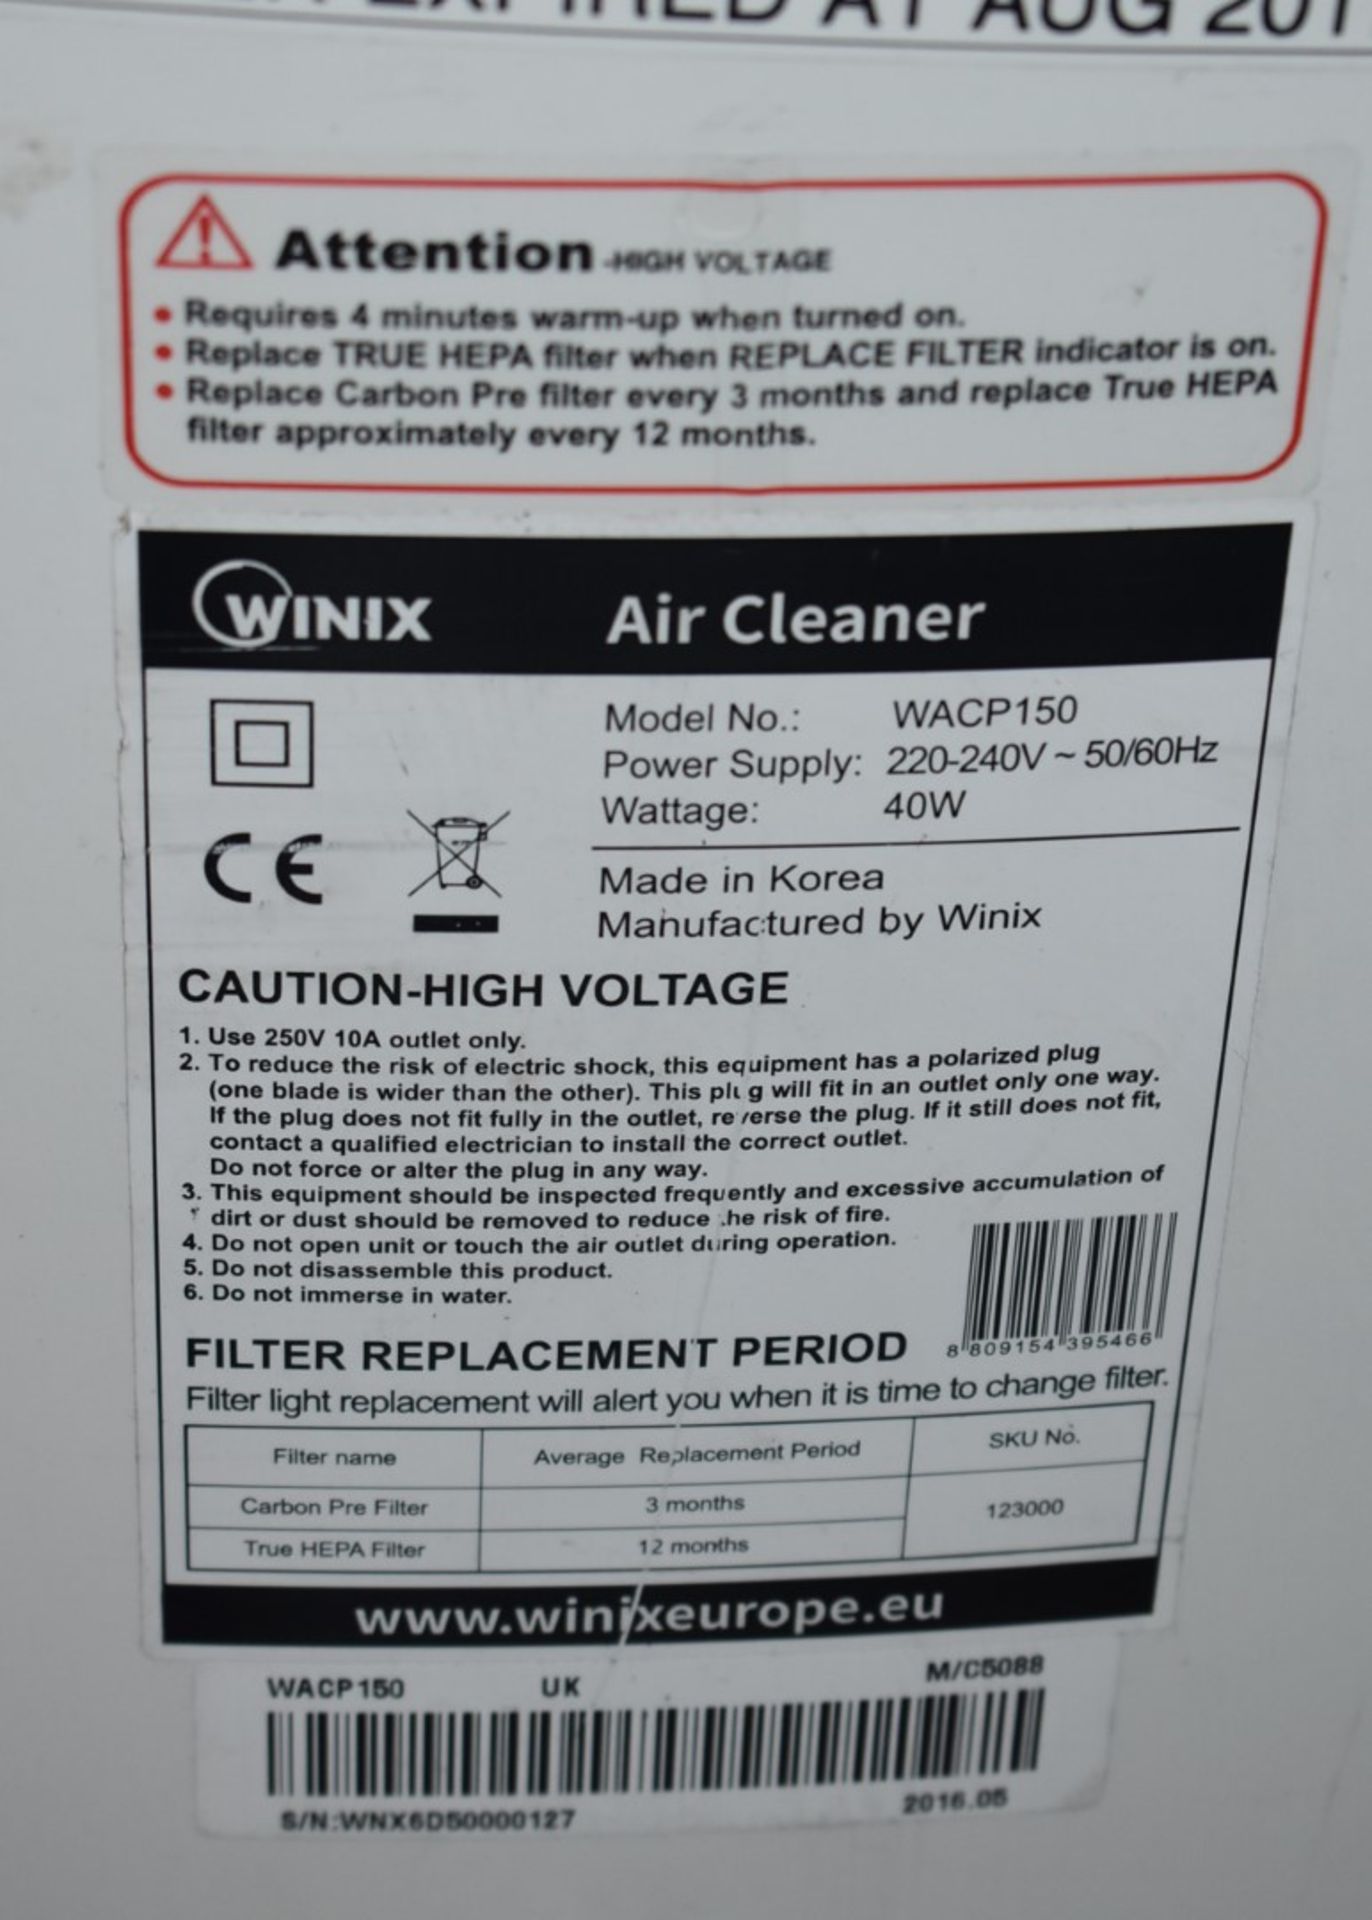 1 x Winx WACP150 Air Purifier With PlasmaWave Technology and HEPA Filter - RRP £190 - Ref: MPC592 - Image 3 of 3